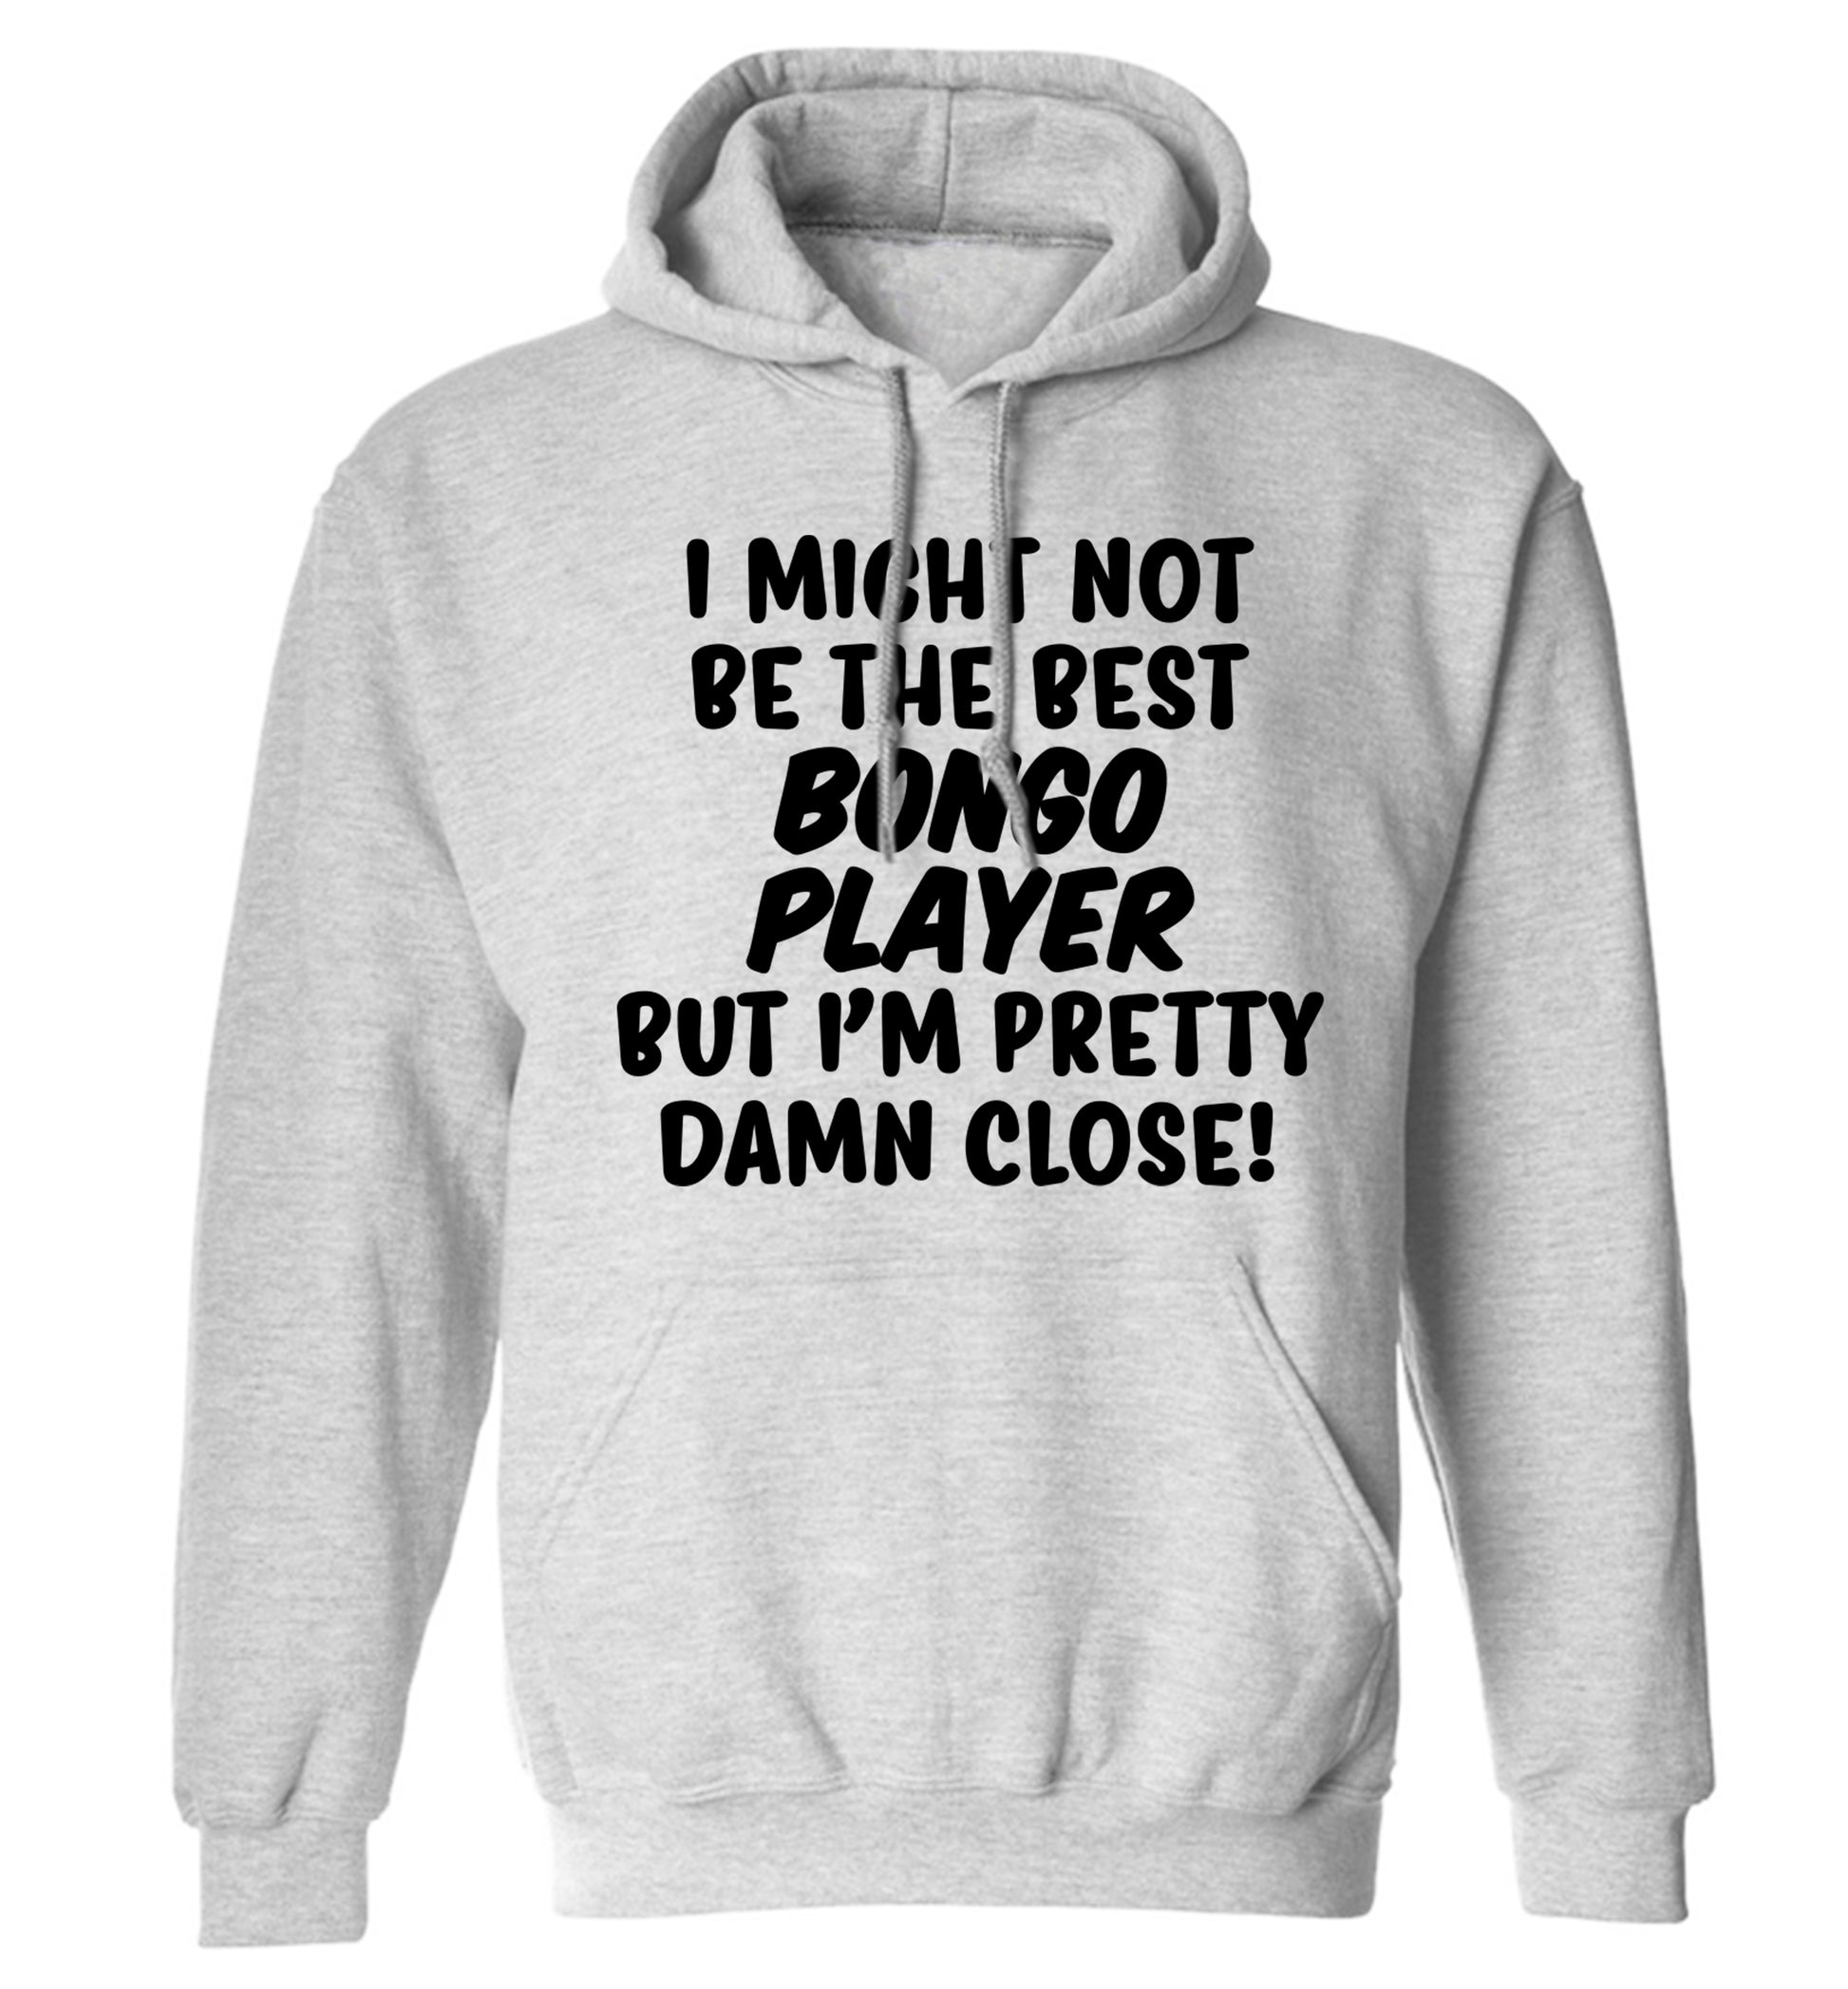 I might not be the best bongo player but I'm pretty close! adults unisexgrey hoodie 2XL